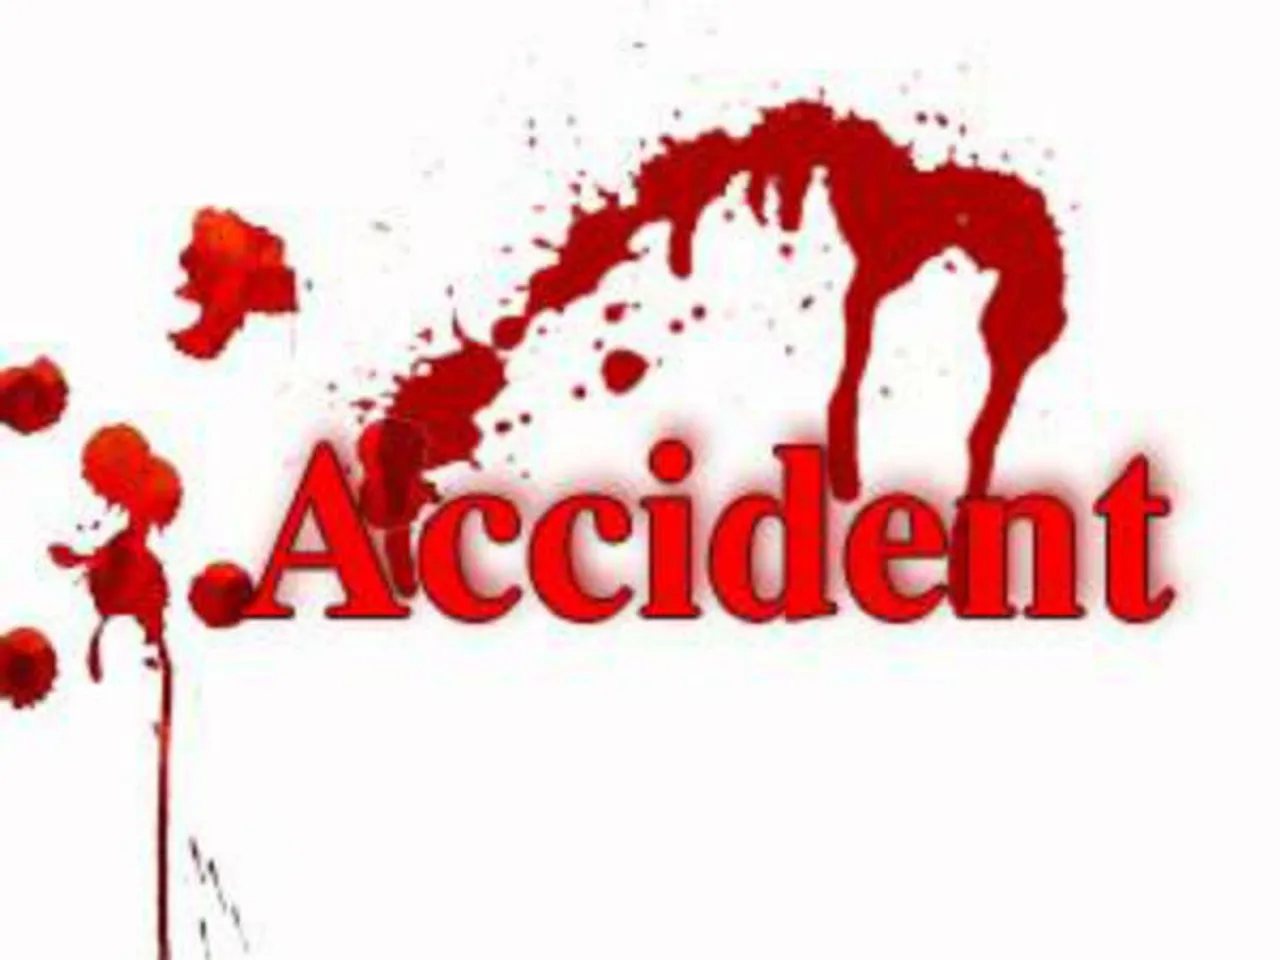 Four Killed In Road Accident In Ferozepur